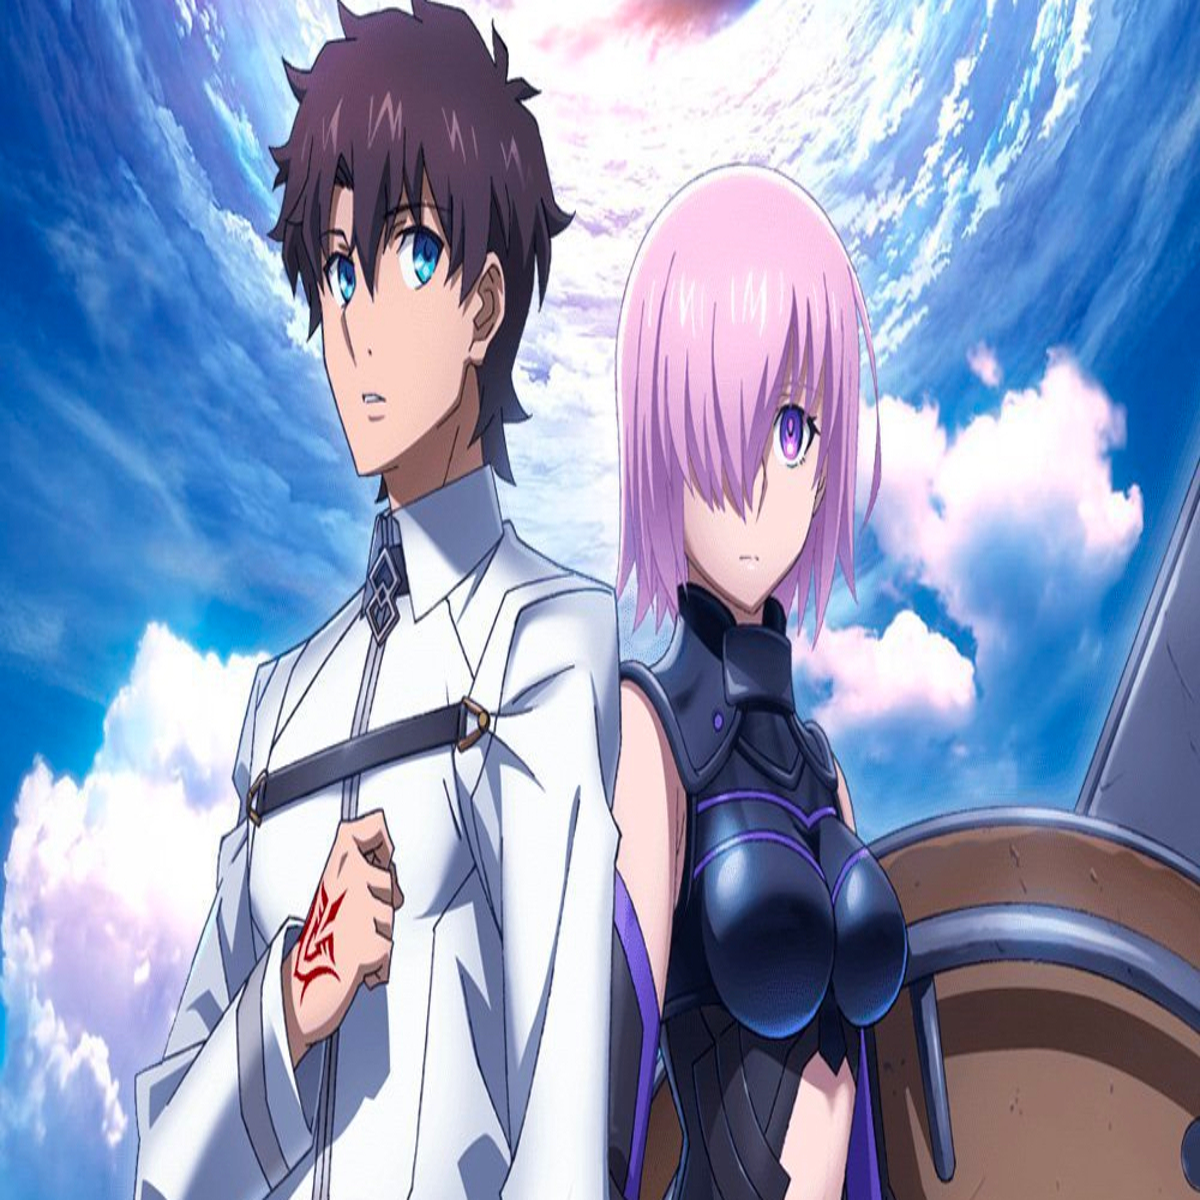 Fate watch order: How to watch the (many) Fate anime series and movies in  chronological and release order